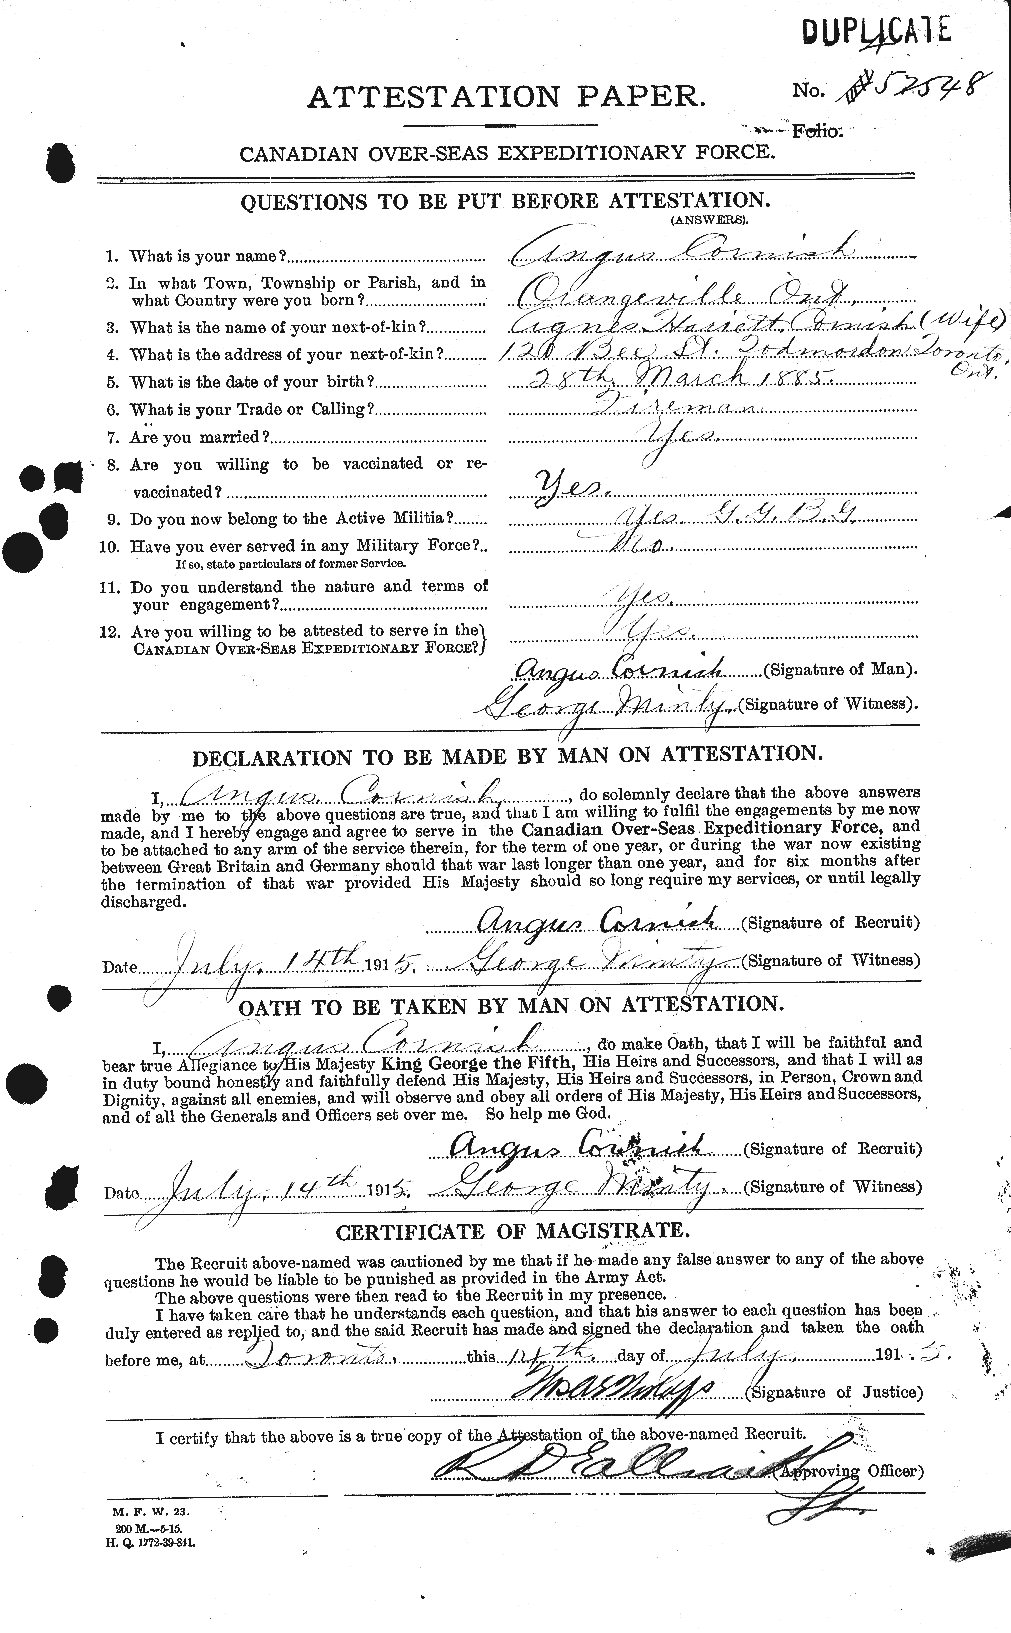 Personnel Records of the First World War - CEF 055810a